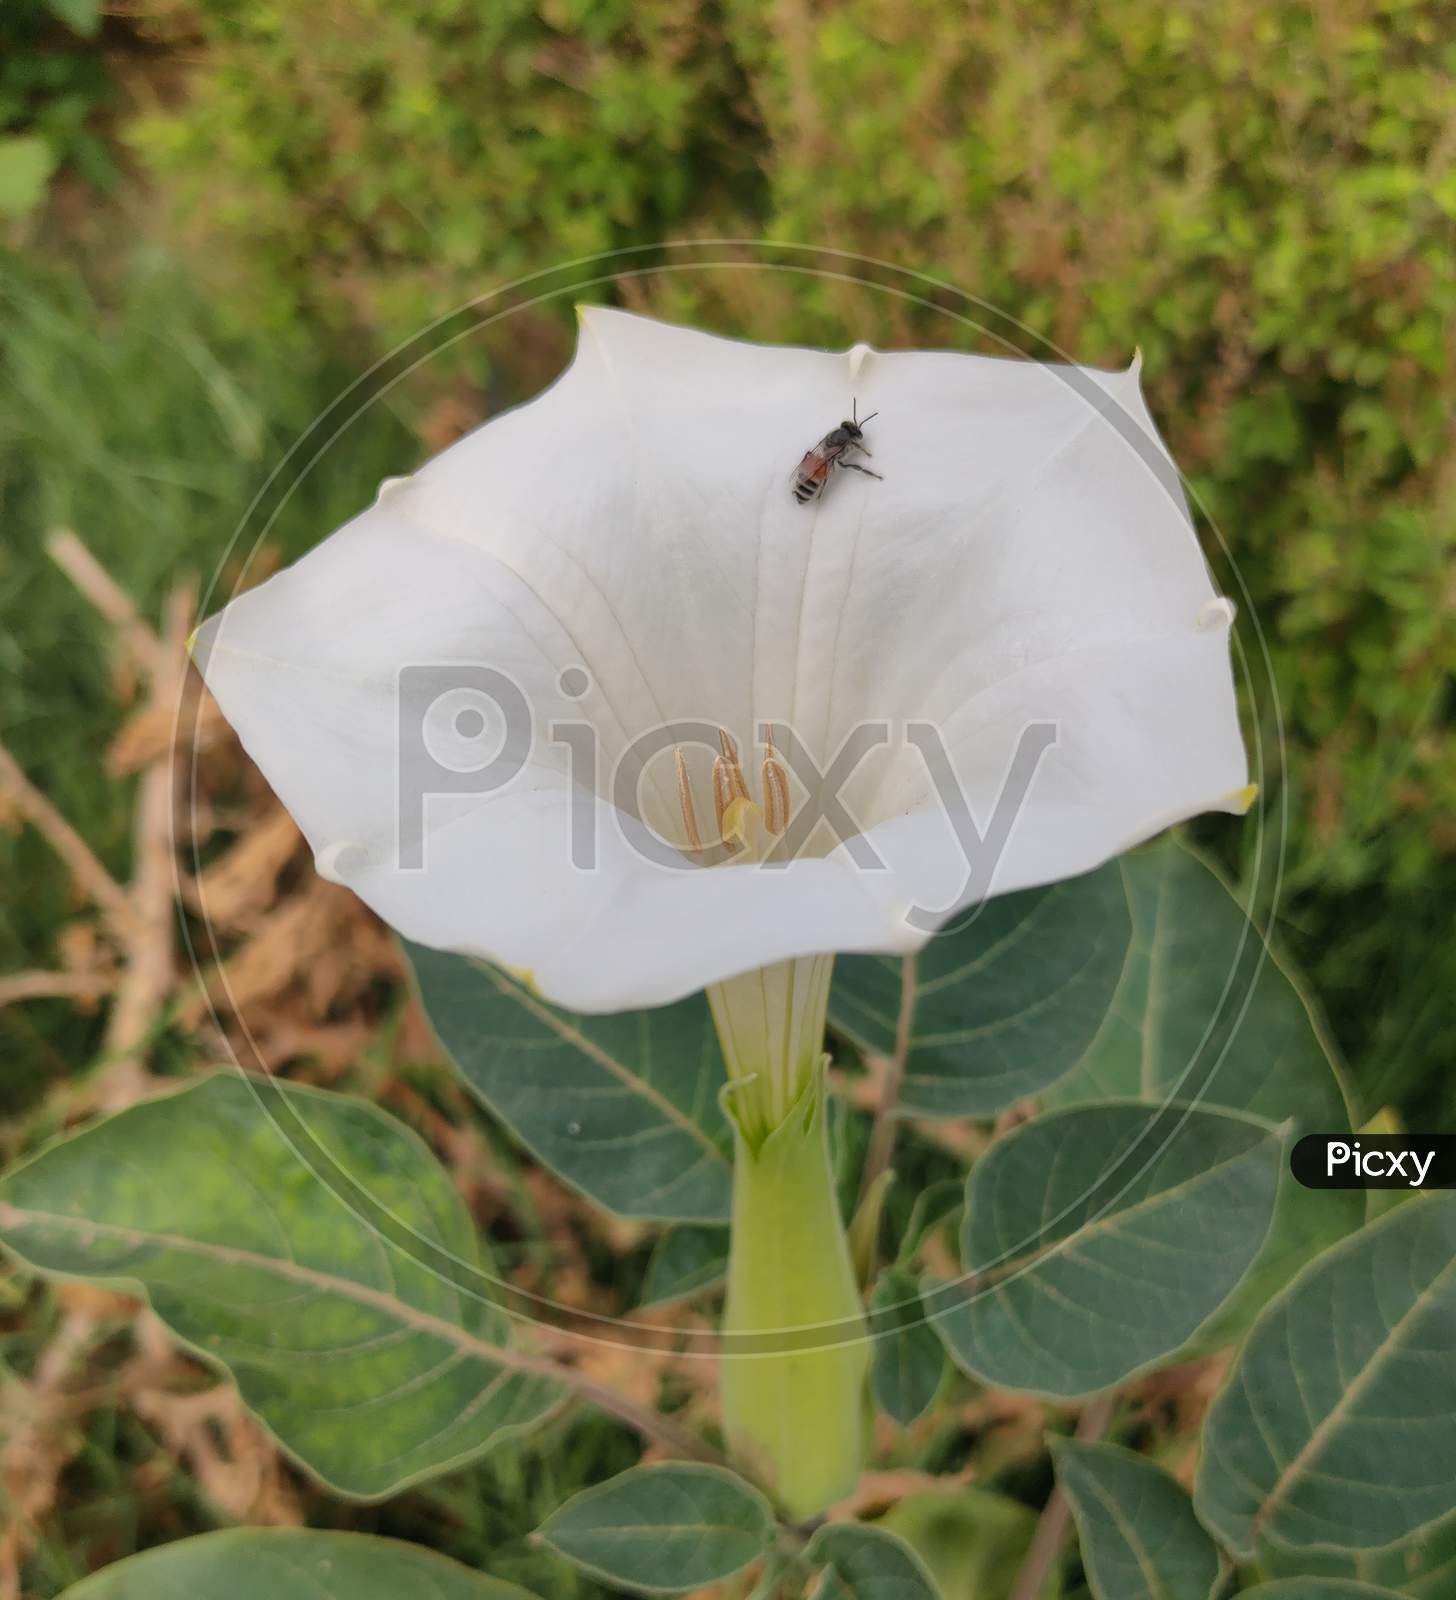 Fly on white flowers